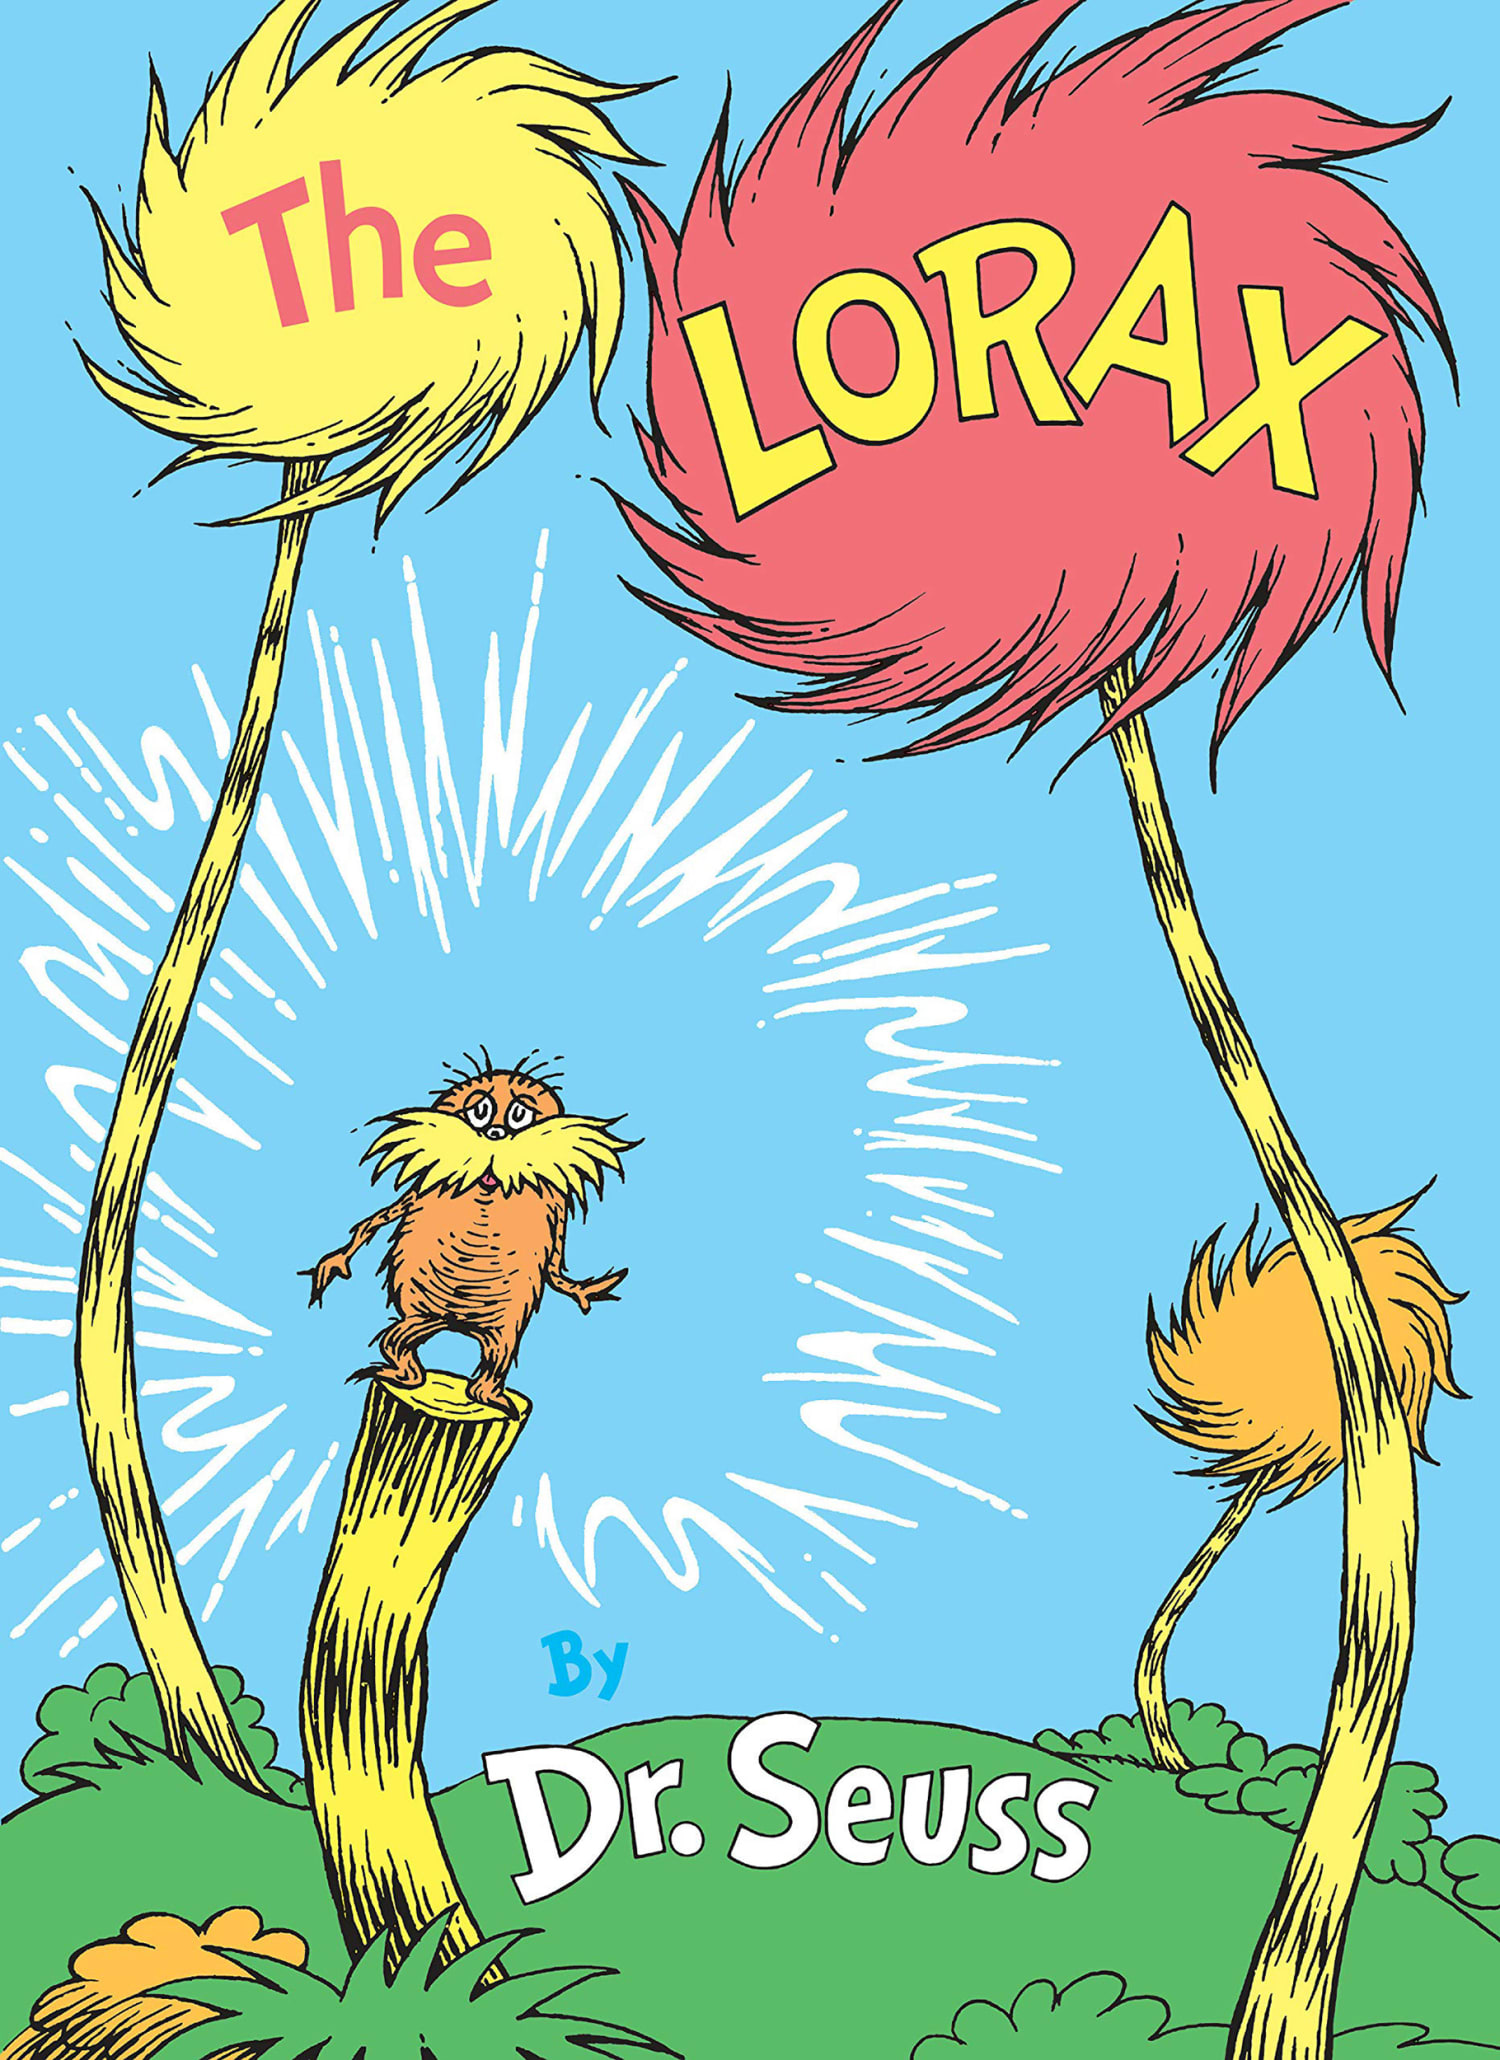 Cypress Tree Thought To Have Inspired Dr Seuss Classic The Lorax Topples